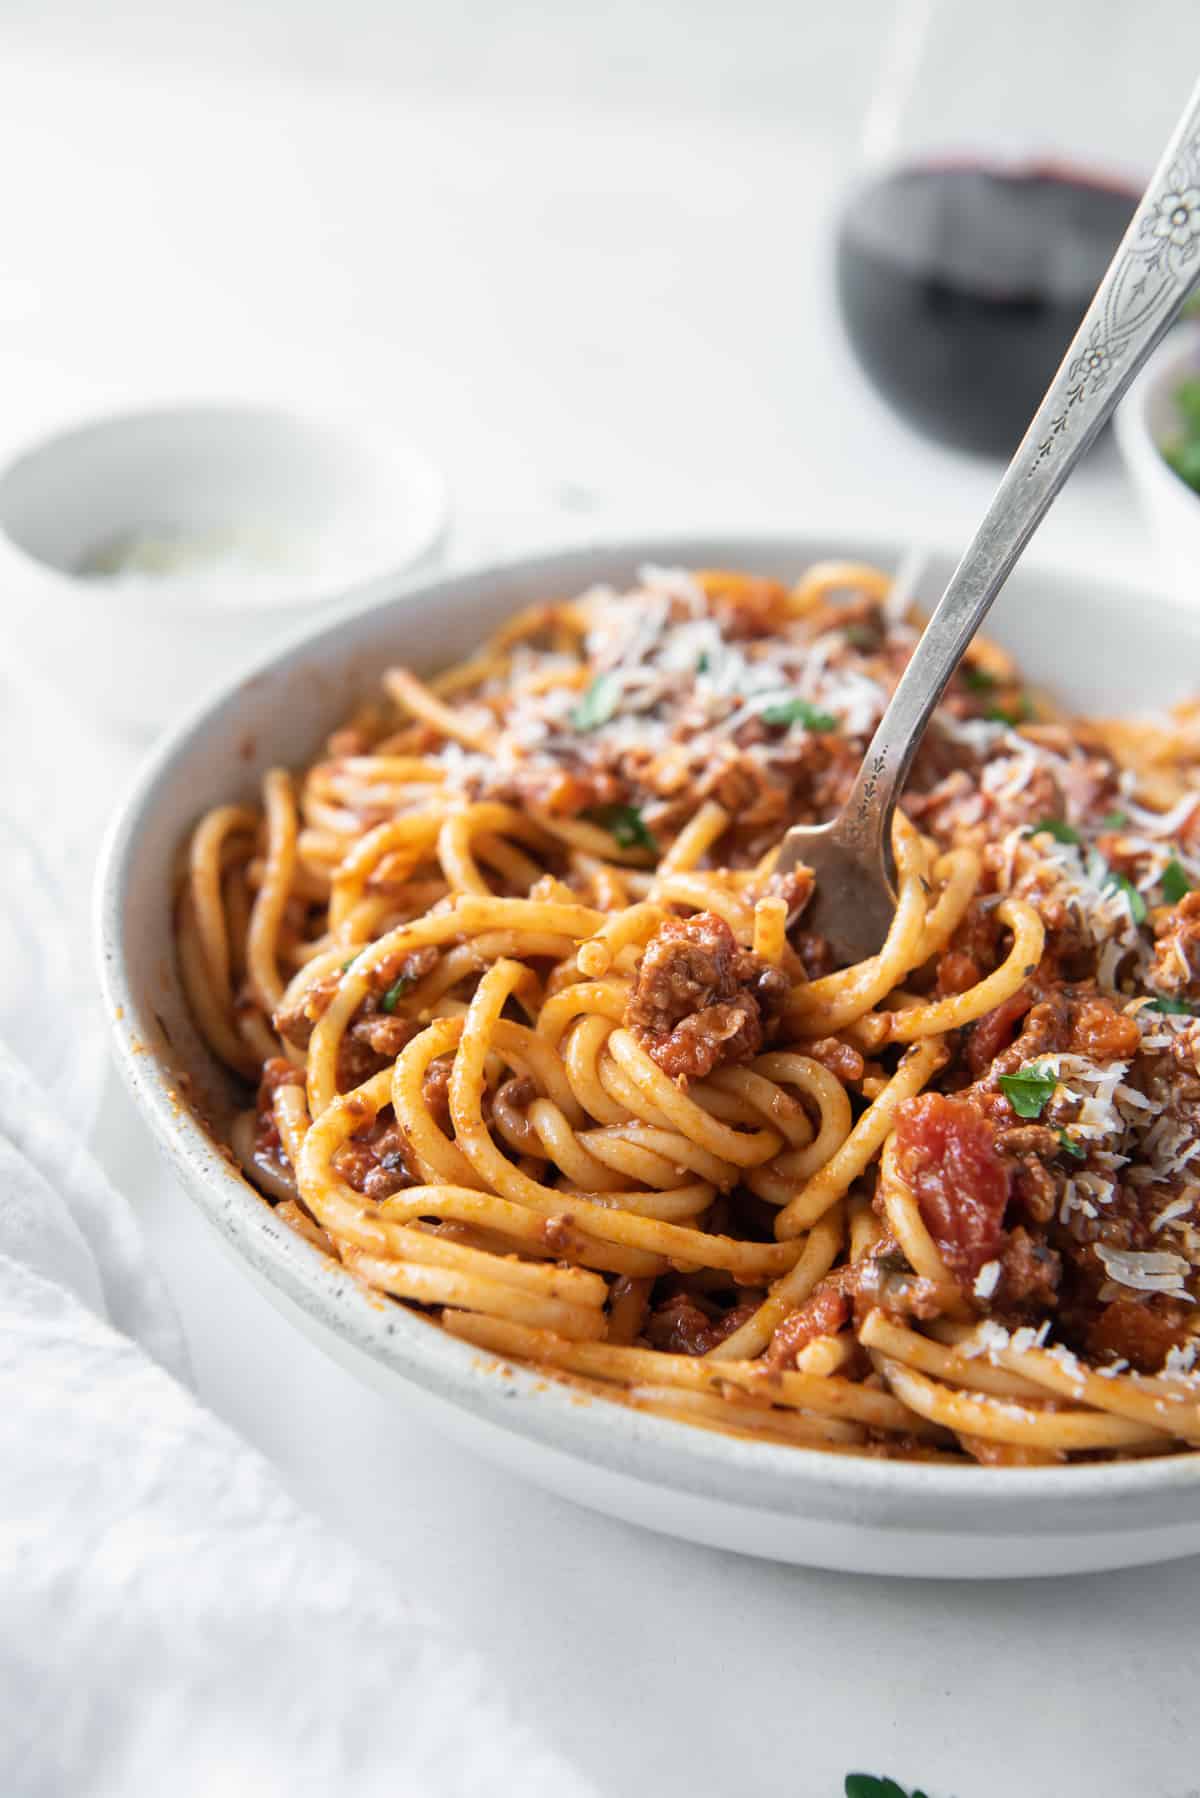 A fork twirling spaghetti with Bolognese sauce in a white bowl.